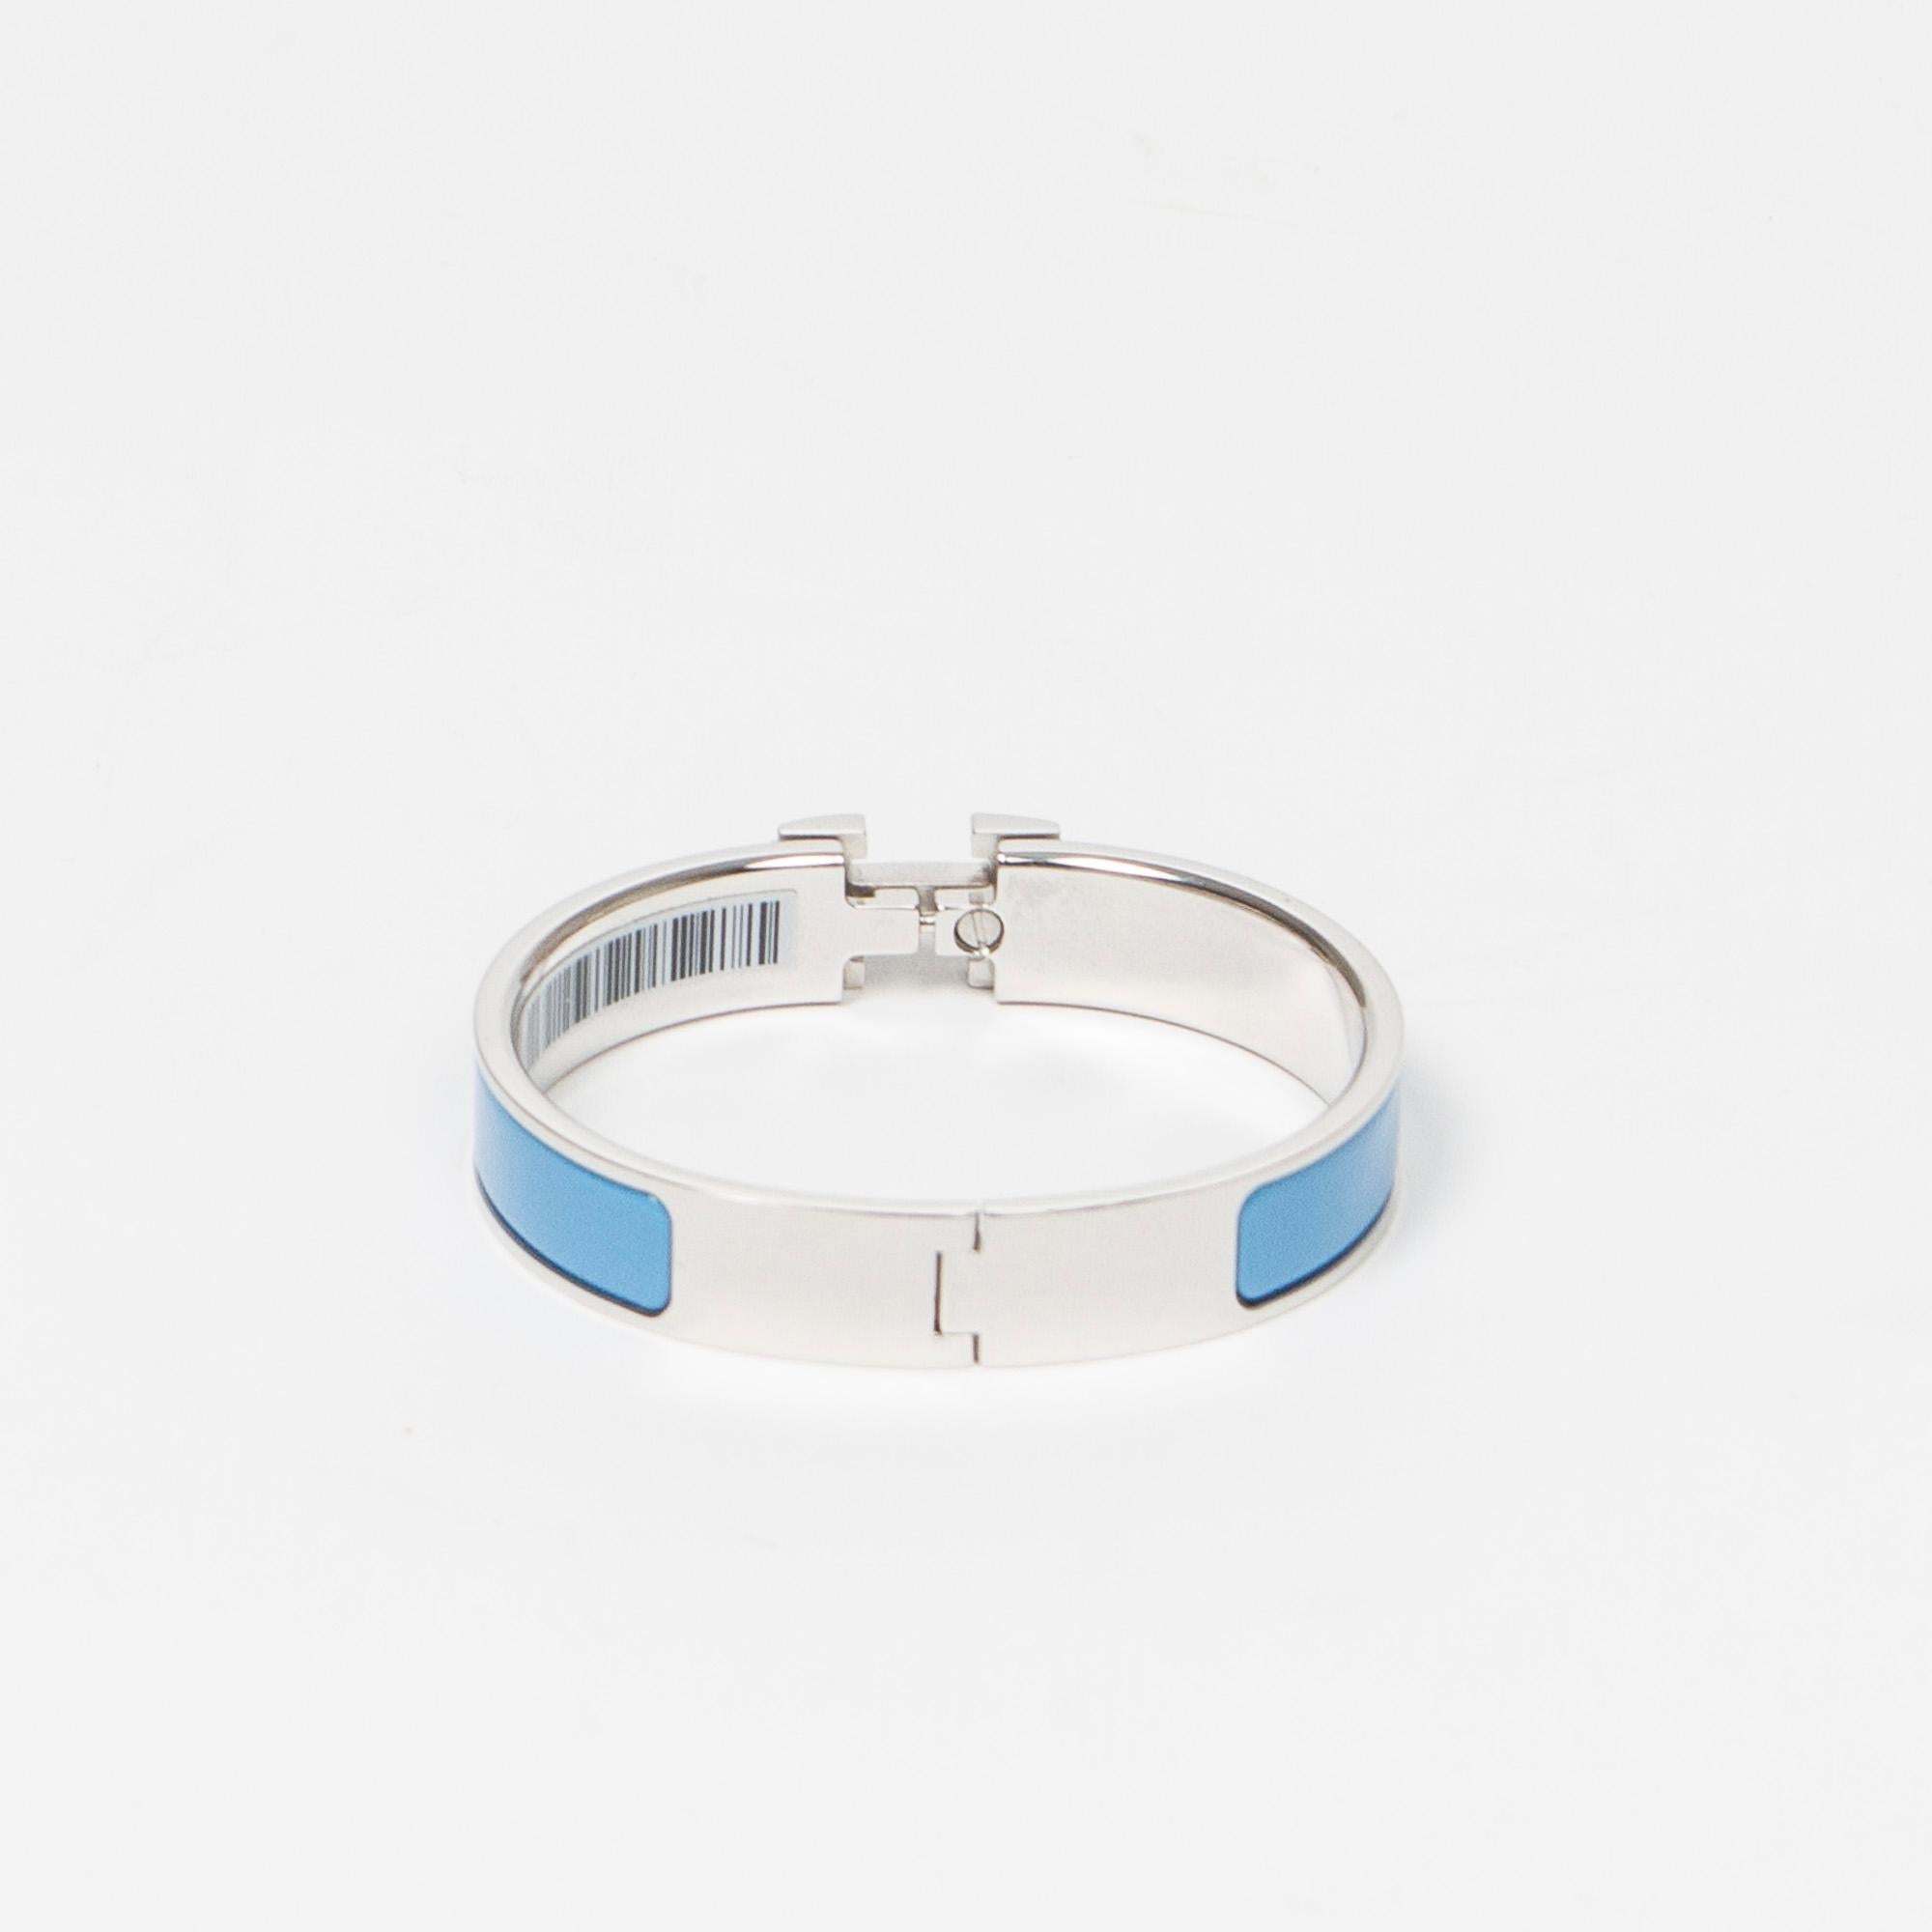 Bracelet Clic H Hermes in Light Blue The Production code is  and the product comes with Dustbag, BoxThis product is rated condition : AA which means Almost New : Excellent Condition, has barely been worn, no major flaws or use signs.. The retail